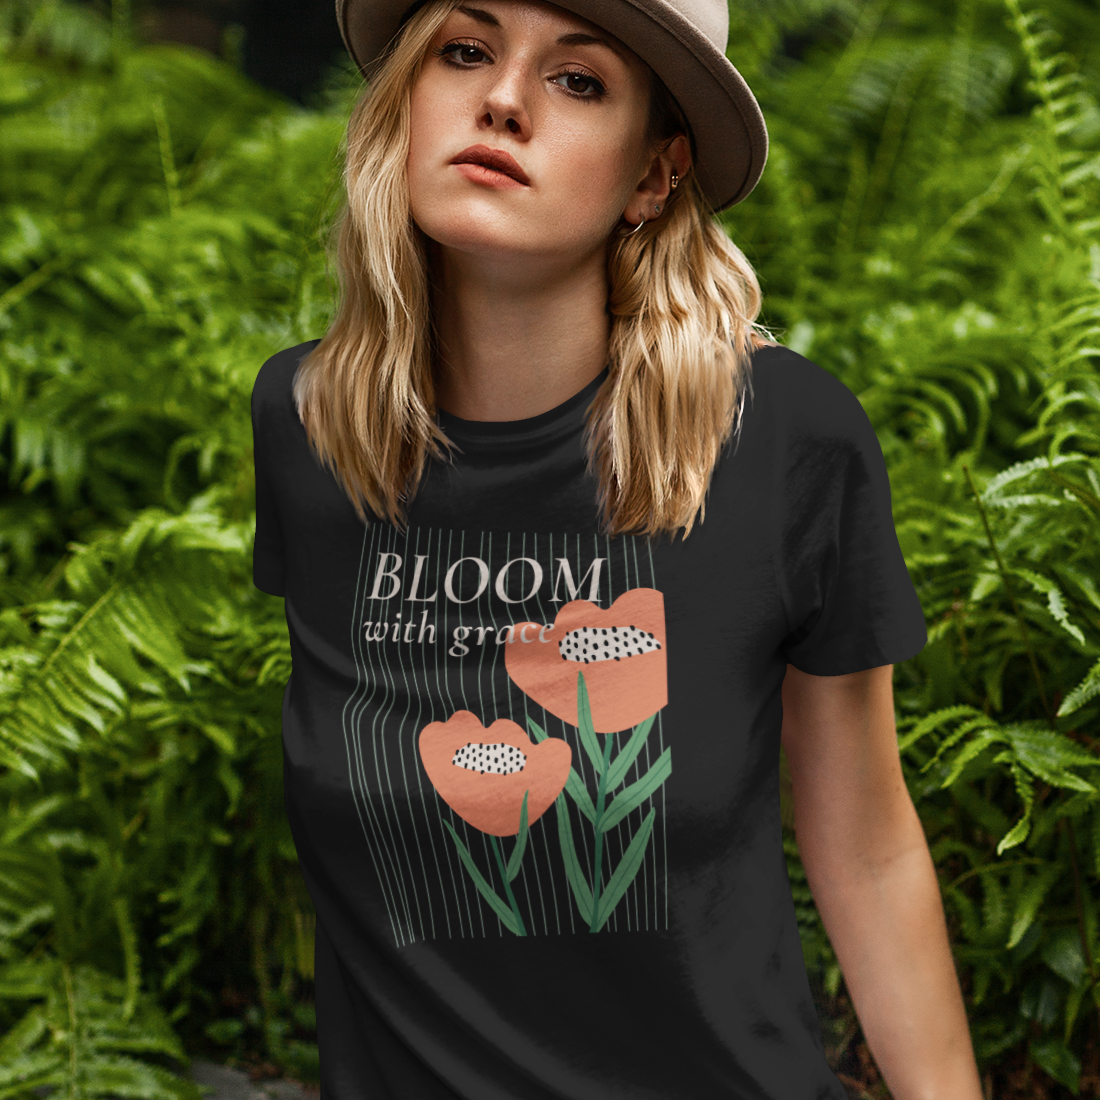 Bloom With Grace - Women's T-Shirt